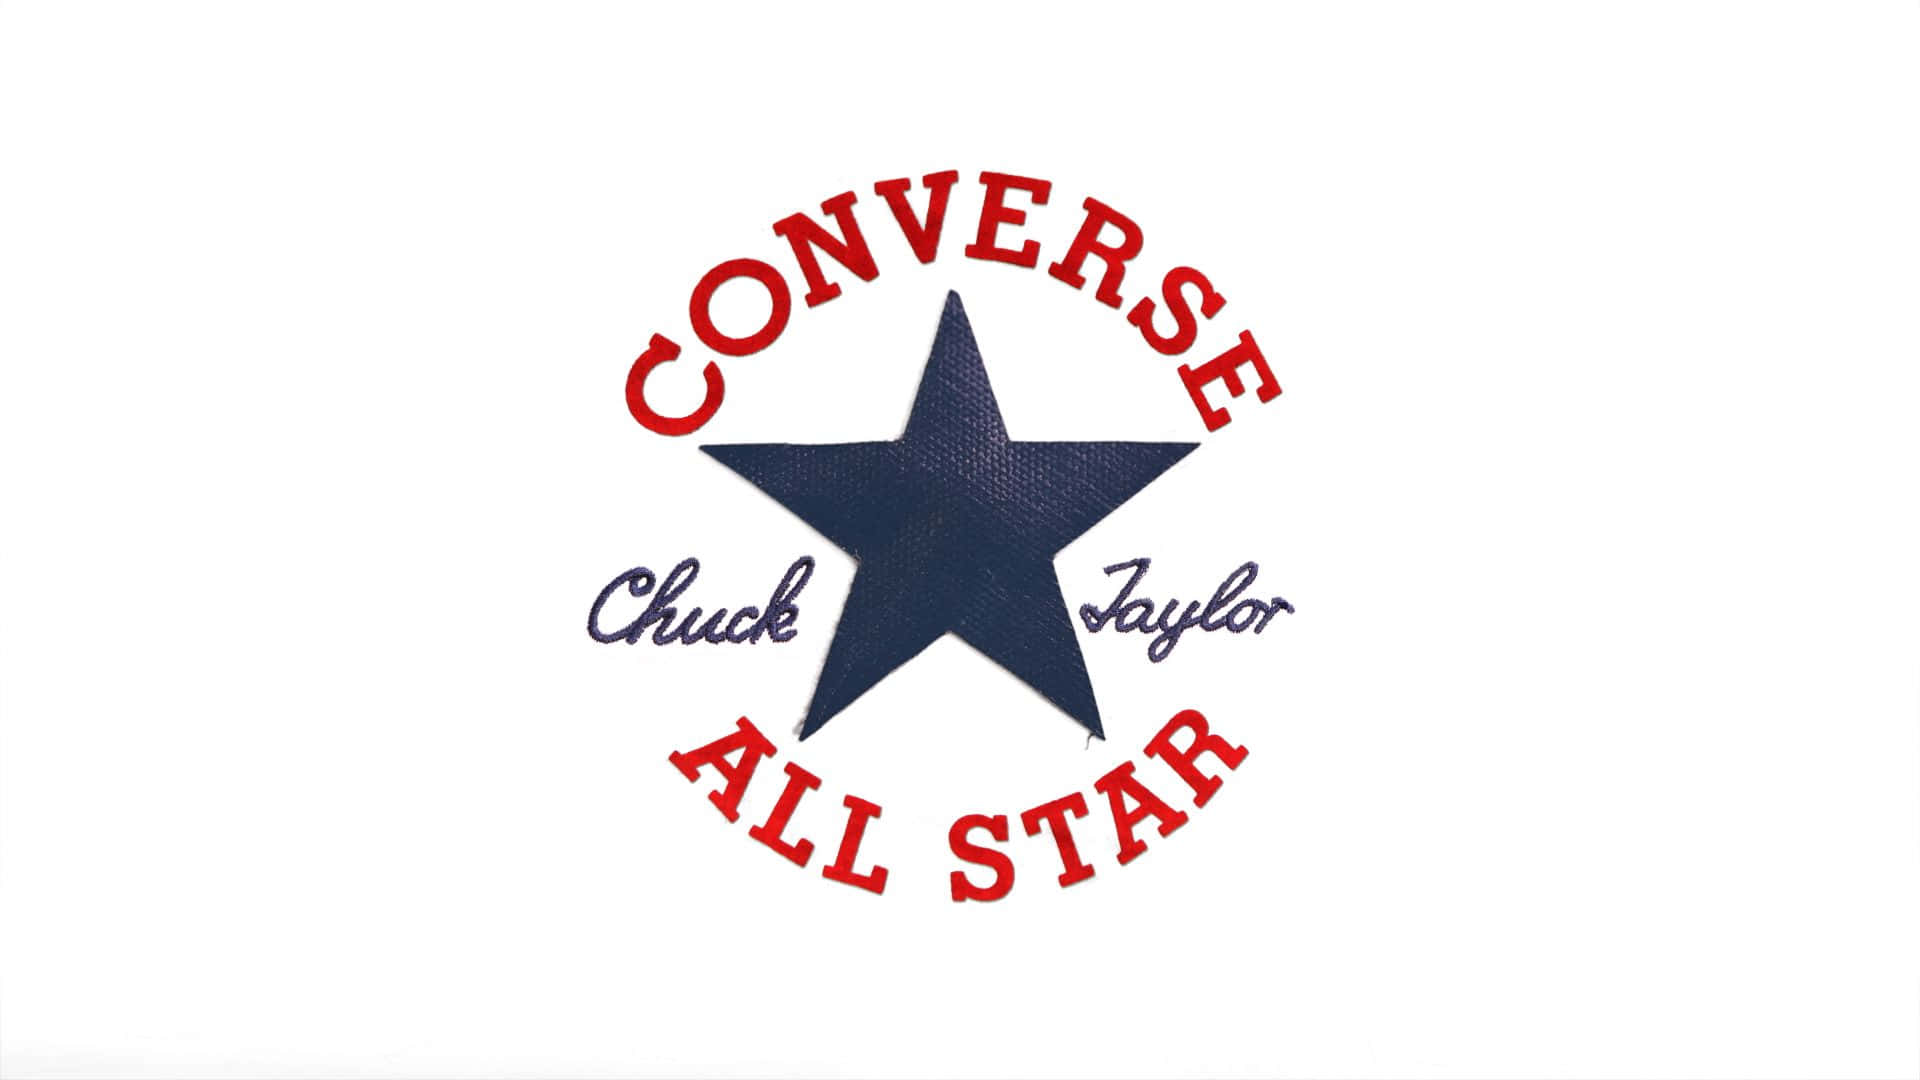 "Get your style moving in all the right directions with the classic Converse shoe design."